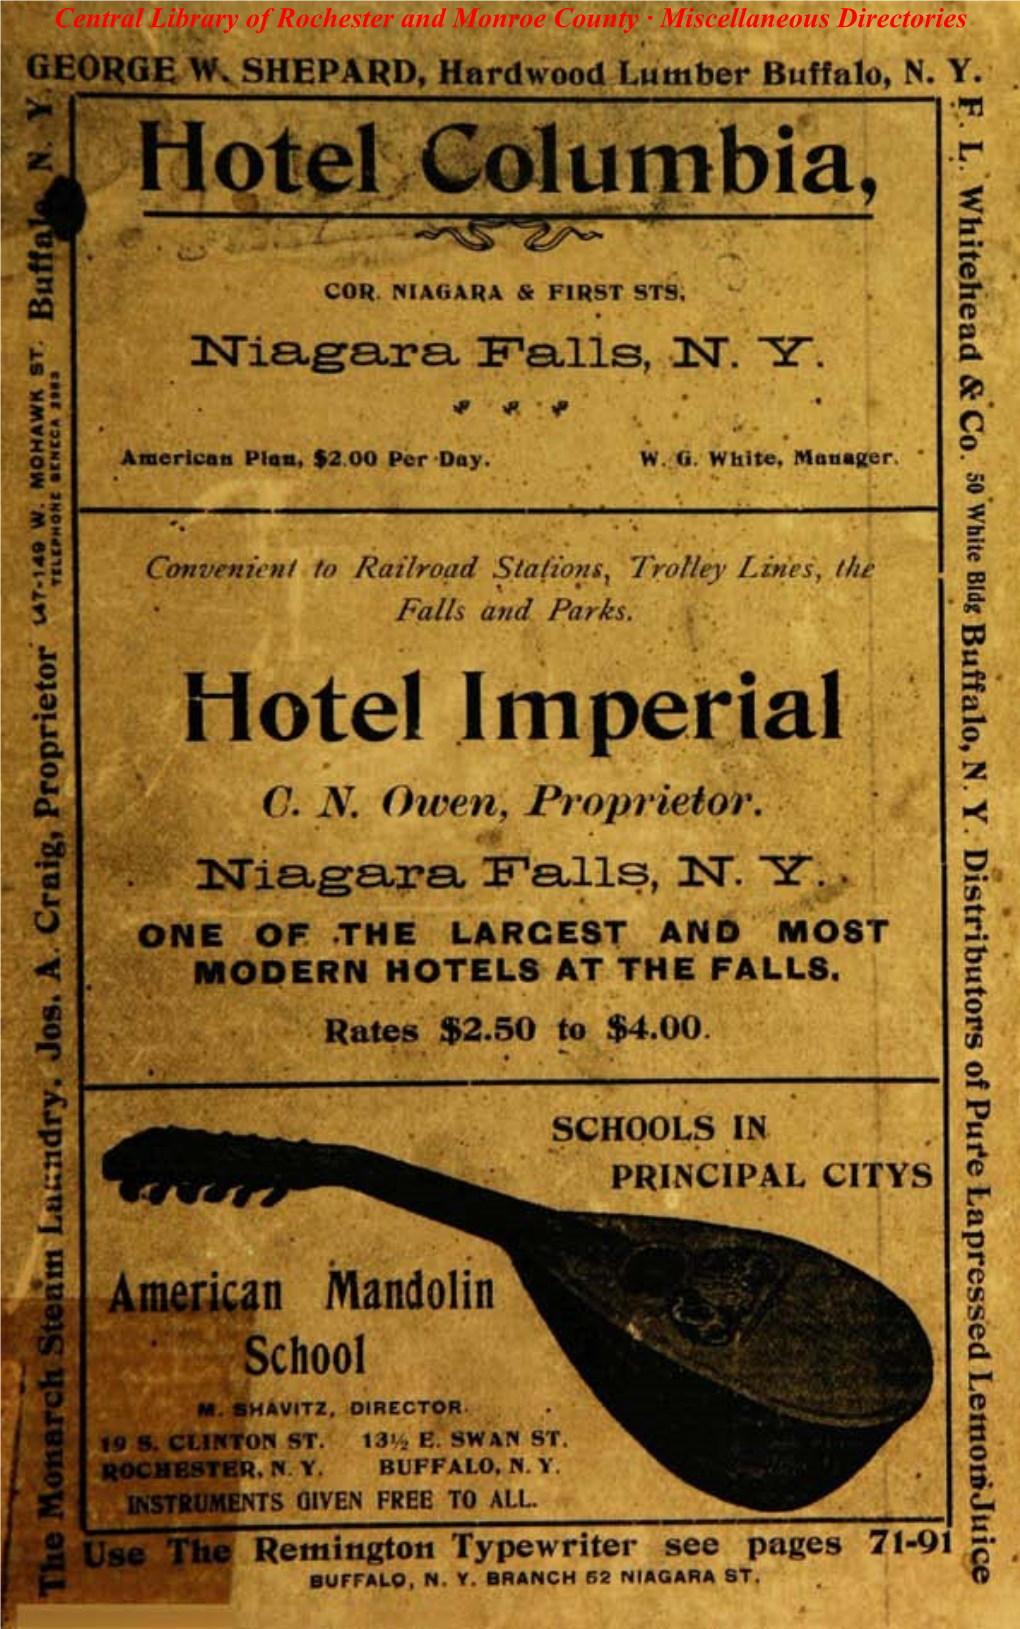 Hotel Columbia, Hotel Imperial